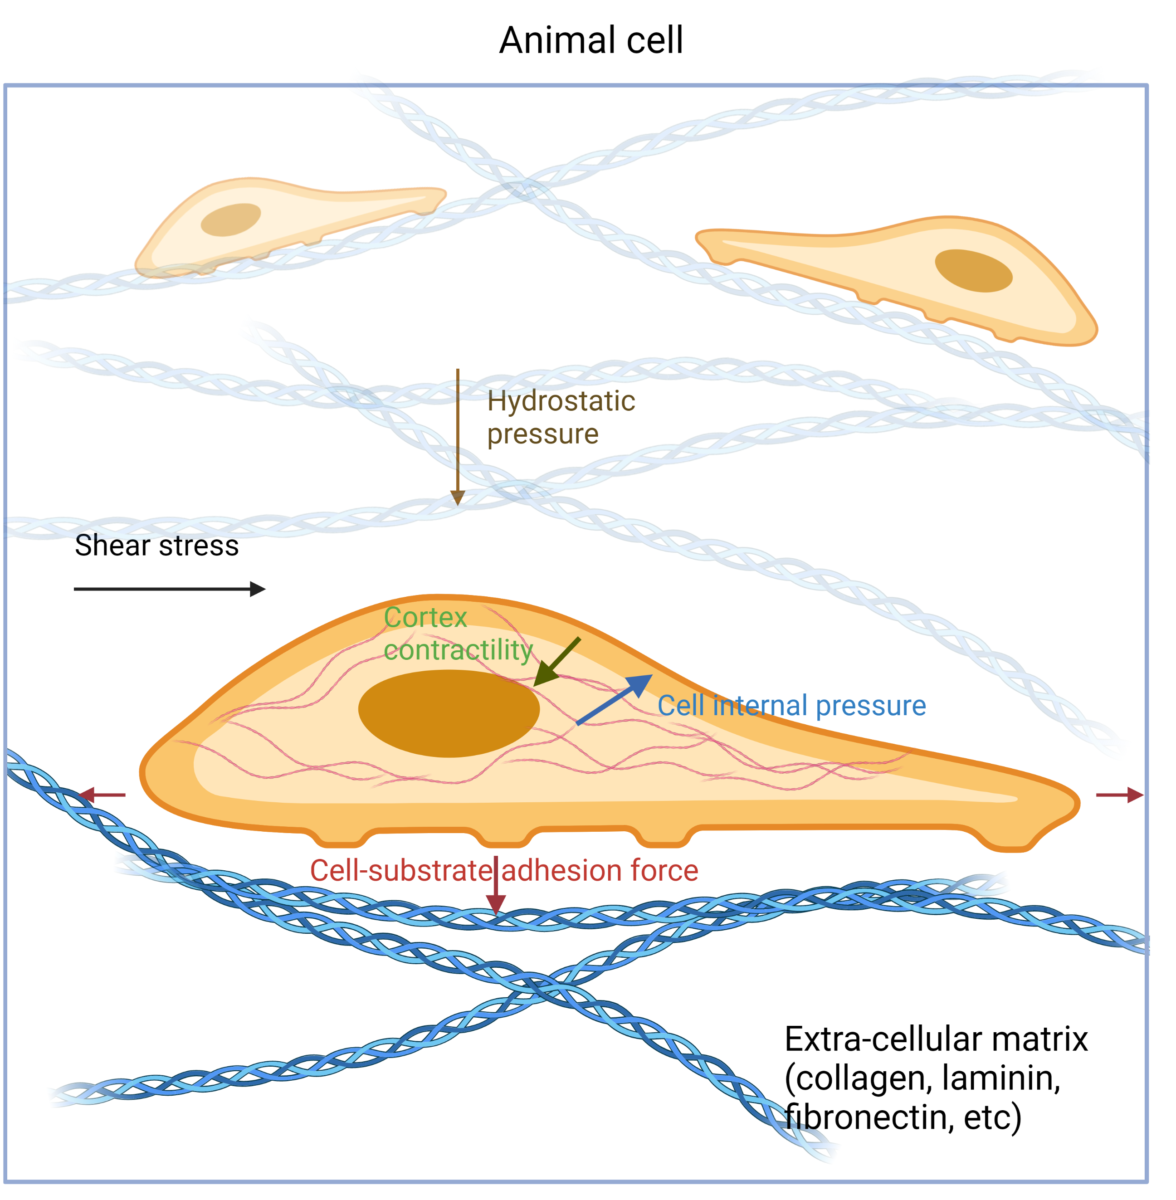 Forces acting on an animal cell